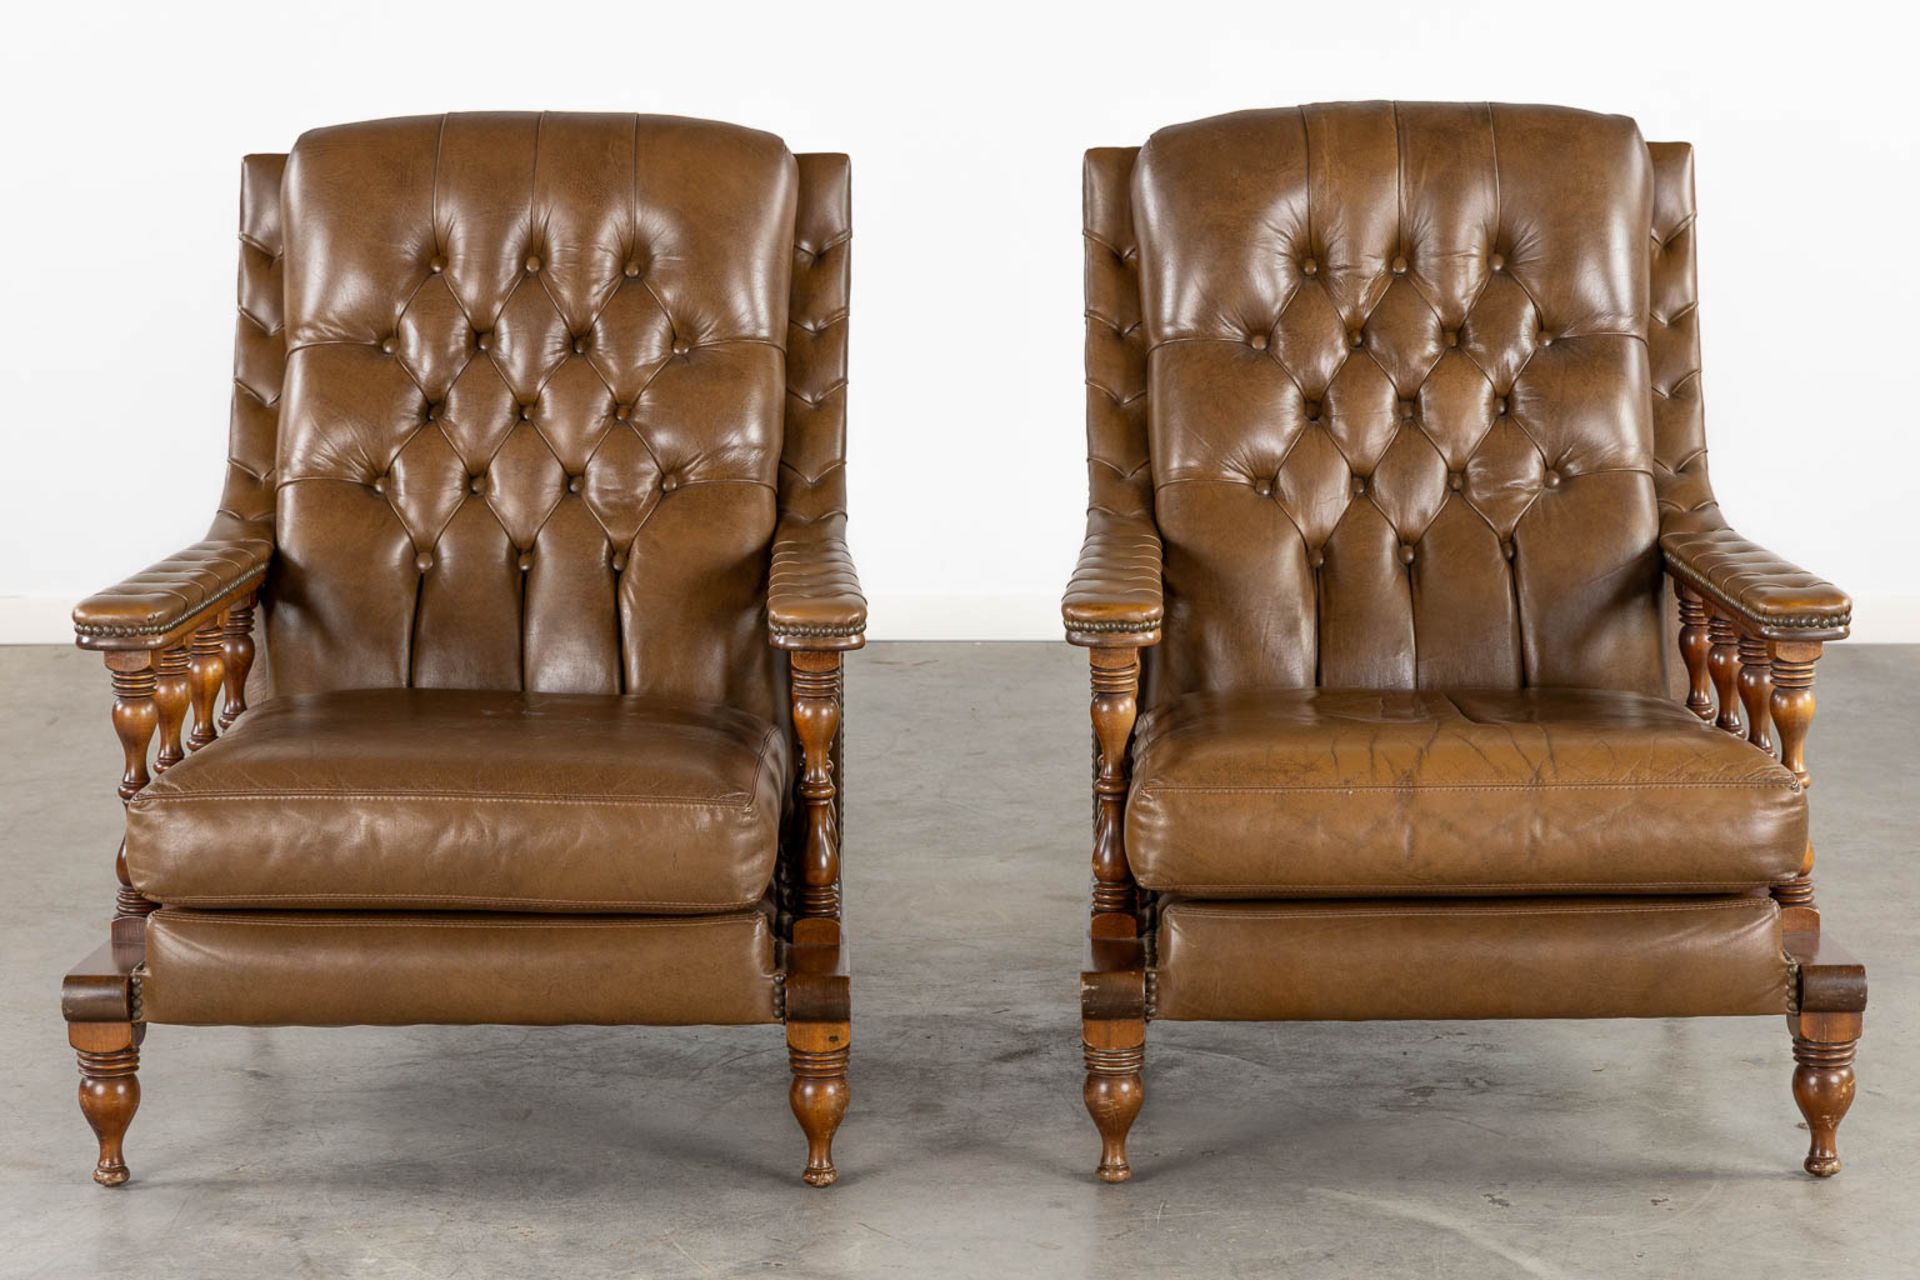 A pair of relax chairs, leather and wood in Chesterfield style. (L:83 x W:74 x H:95 cm) - Bild 3 aus 11